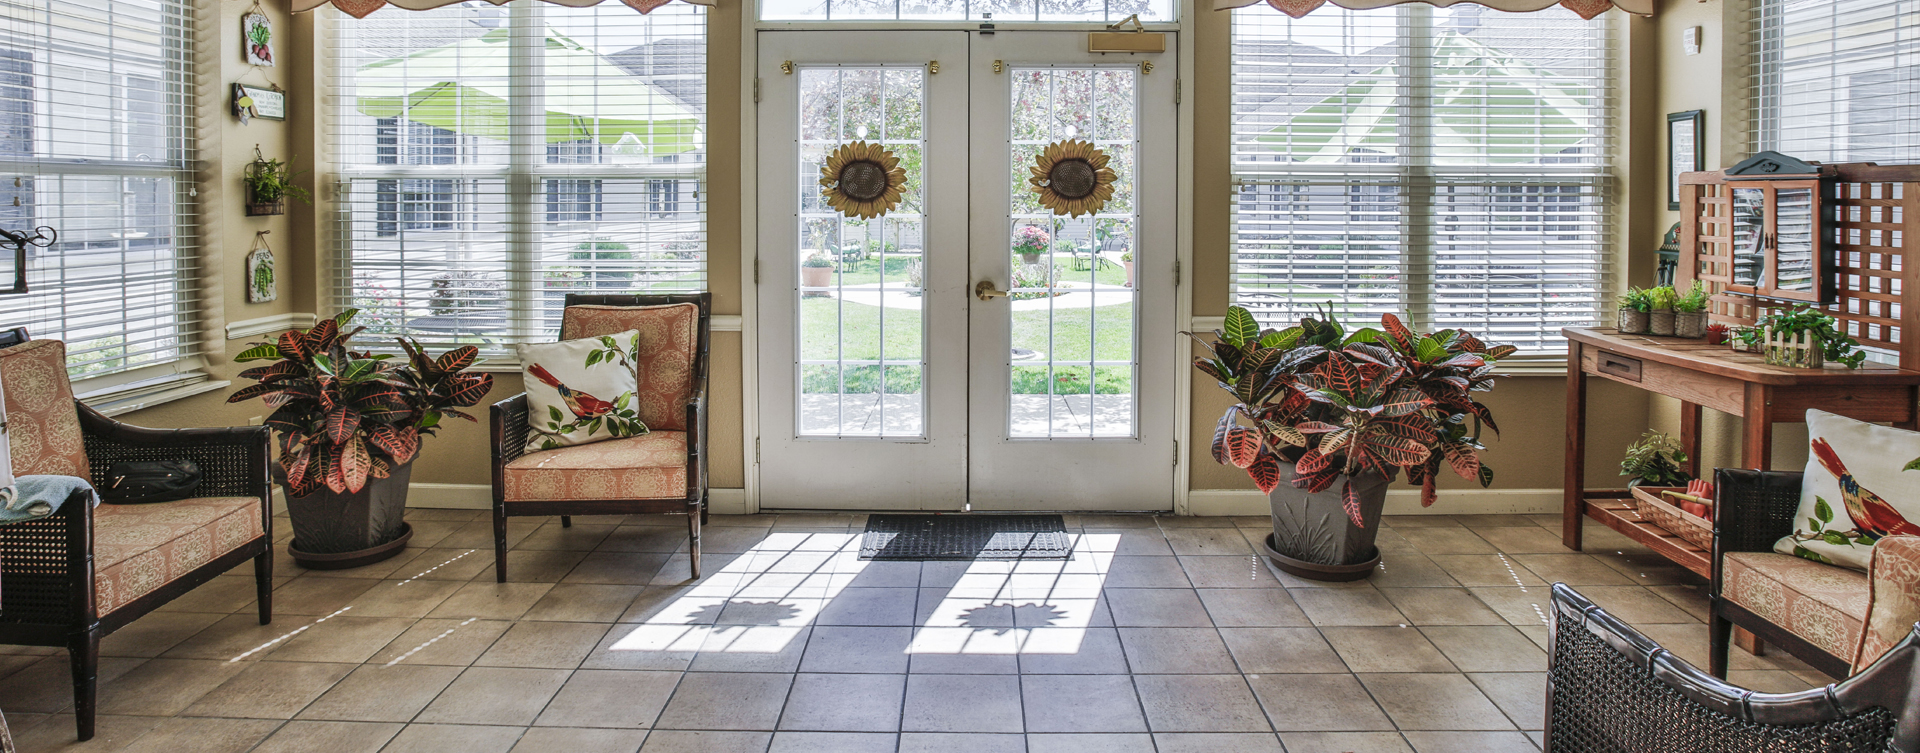 Relax in the warmth of the sunroom at Bickford of Peoria